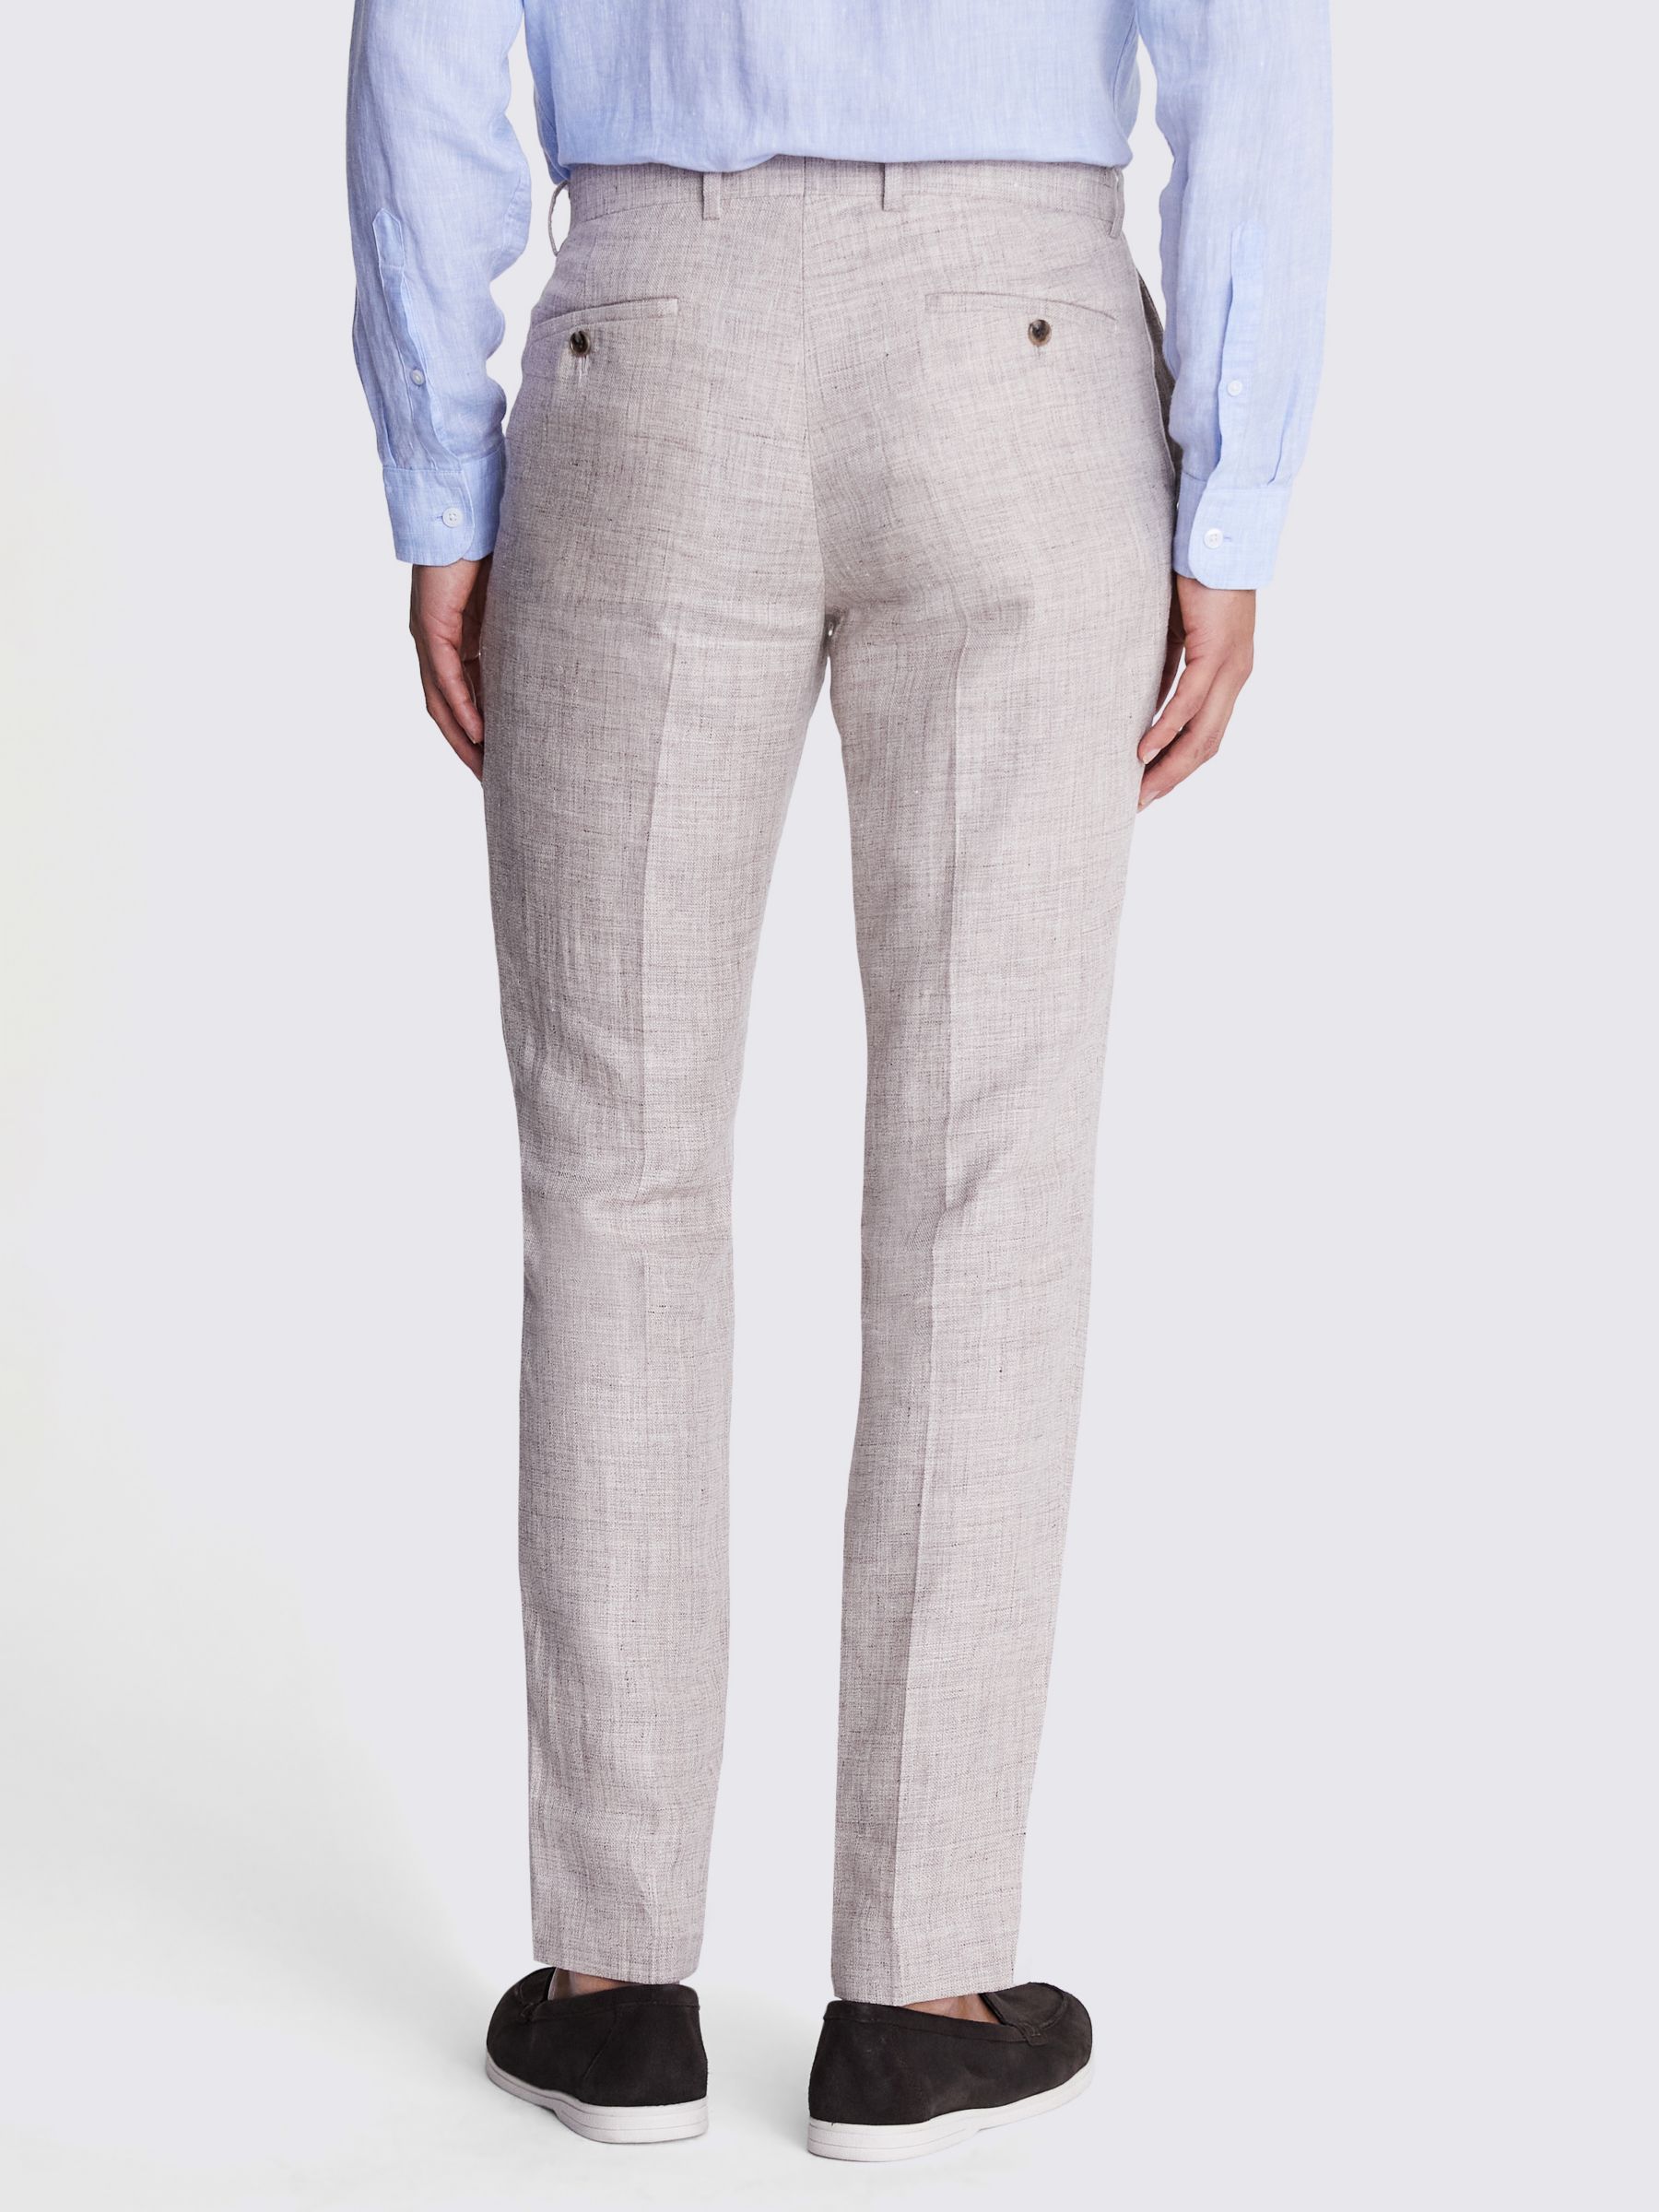 Moss Tailored Fit Linen Trousers, Oatmeal, 46L